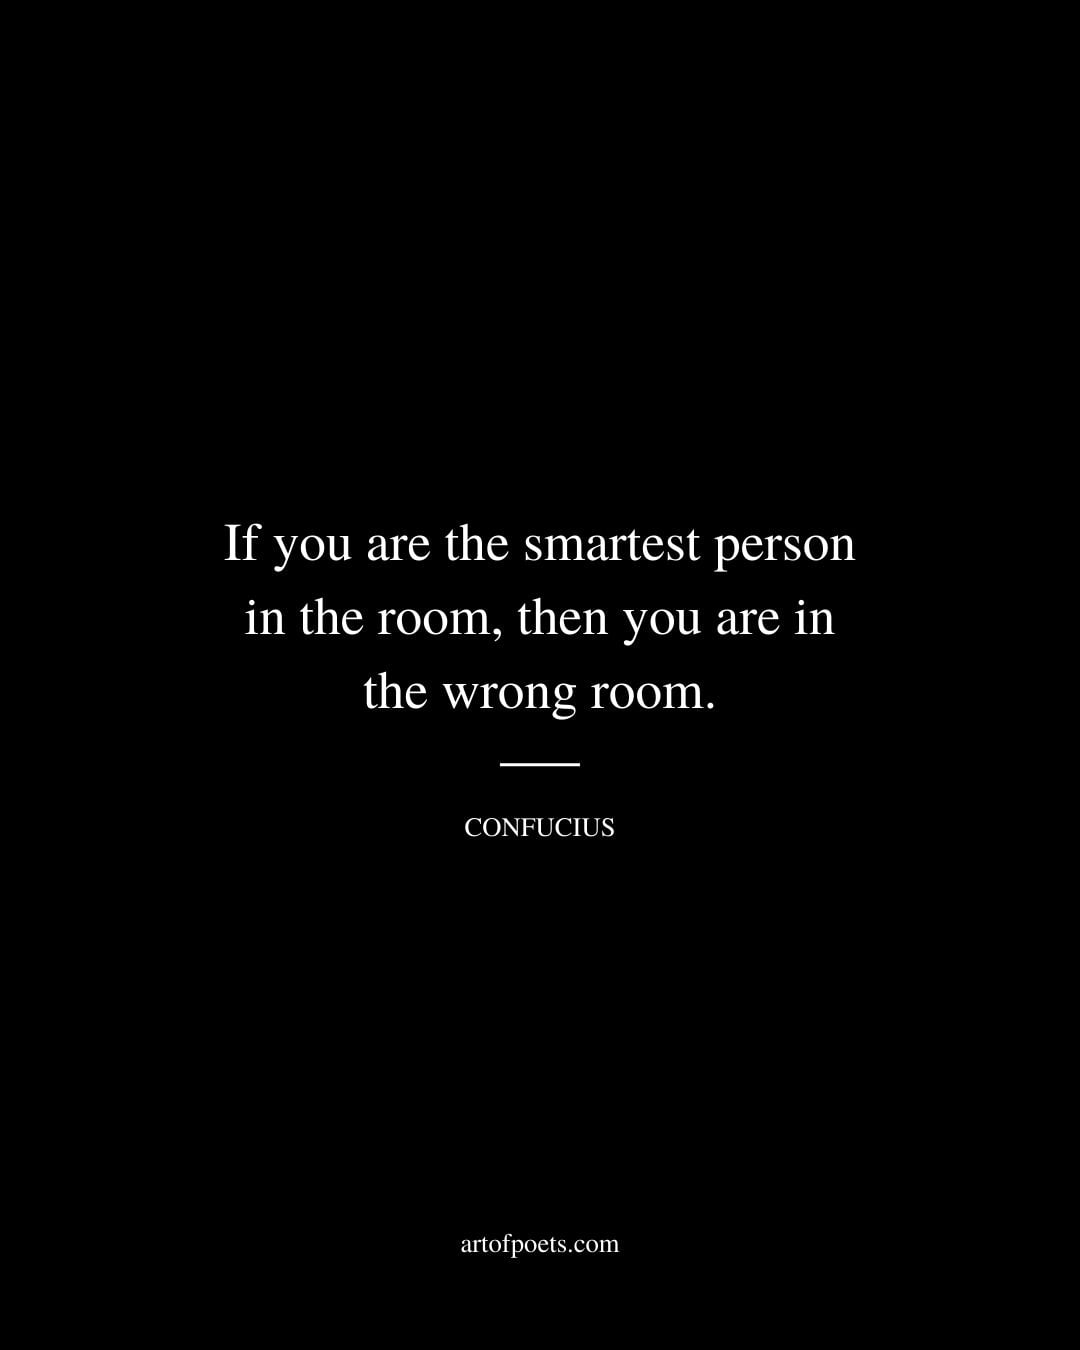 If you are the smartest person in the room then you are in the wrong room